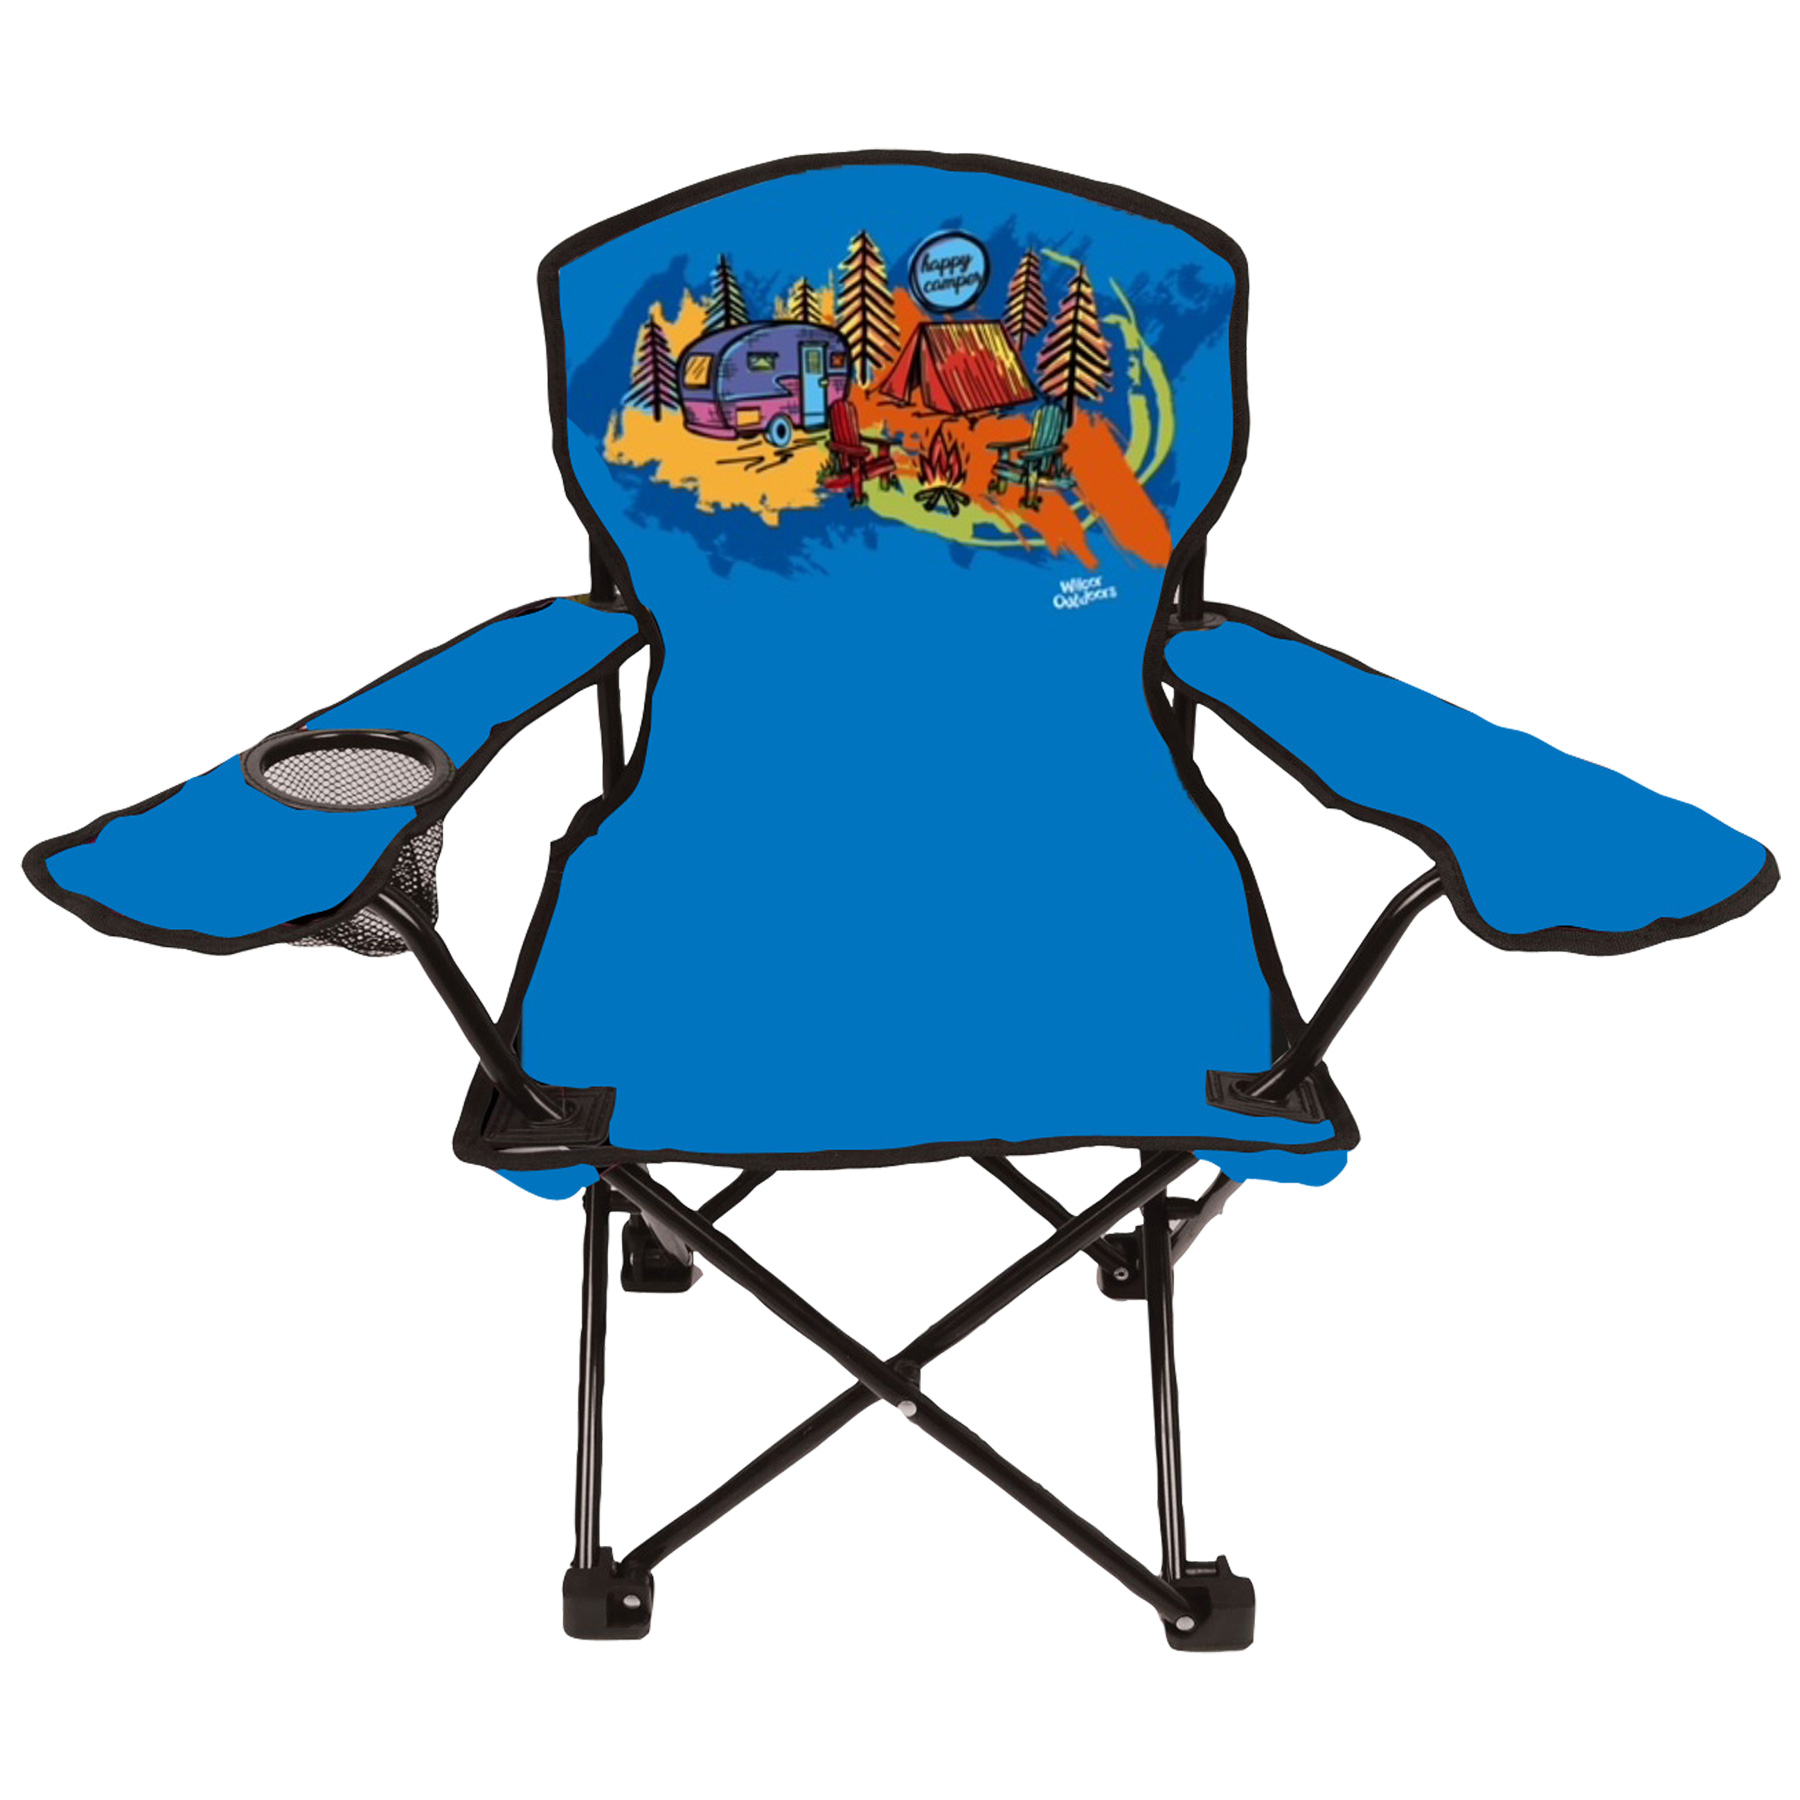 HAPPY CAMPER SCENE ADULT ARM CHAIR